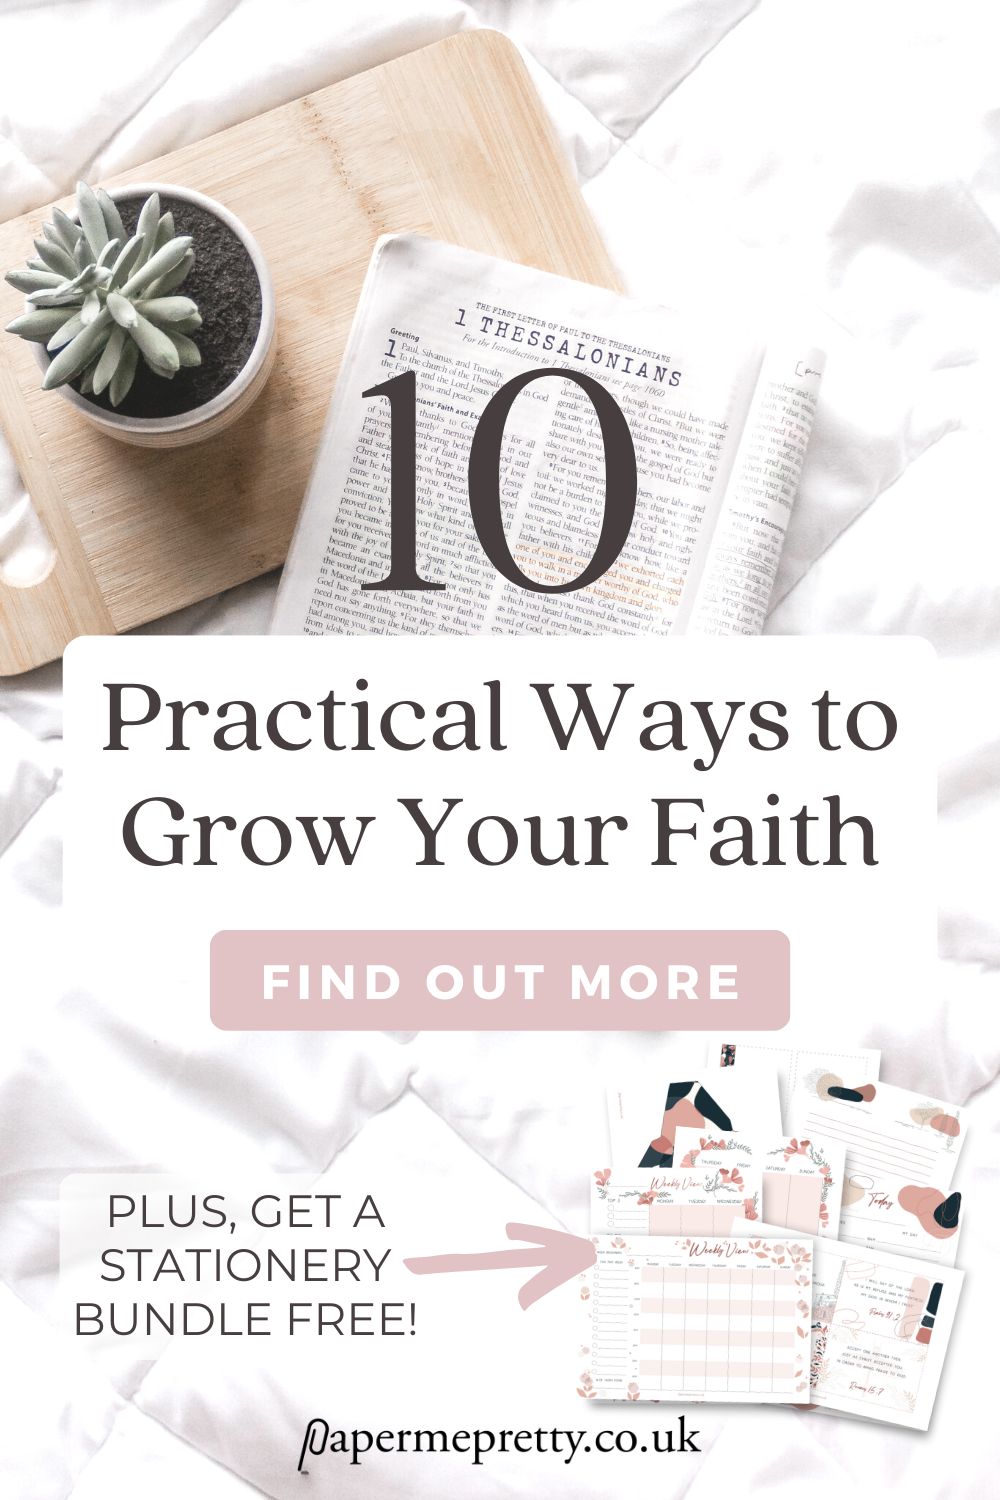 Are you longing to deepen your faith and experience a closer relationship with God? Look no further! I've got some practical tips that can truly transform your spiritual journey as well as a FREE stationery bundle for you to grab today! #SpiritualGrowth #Faith #Stationery #Christian #Jesus #Bible